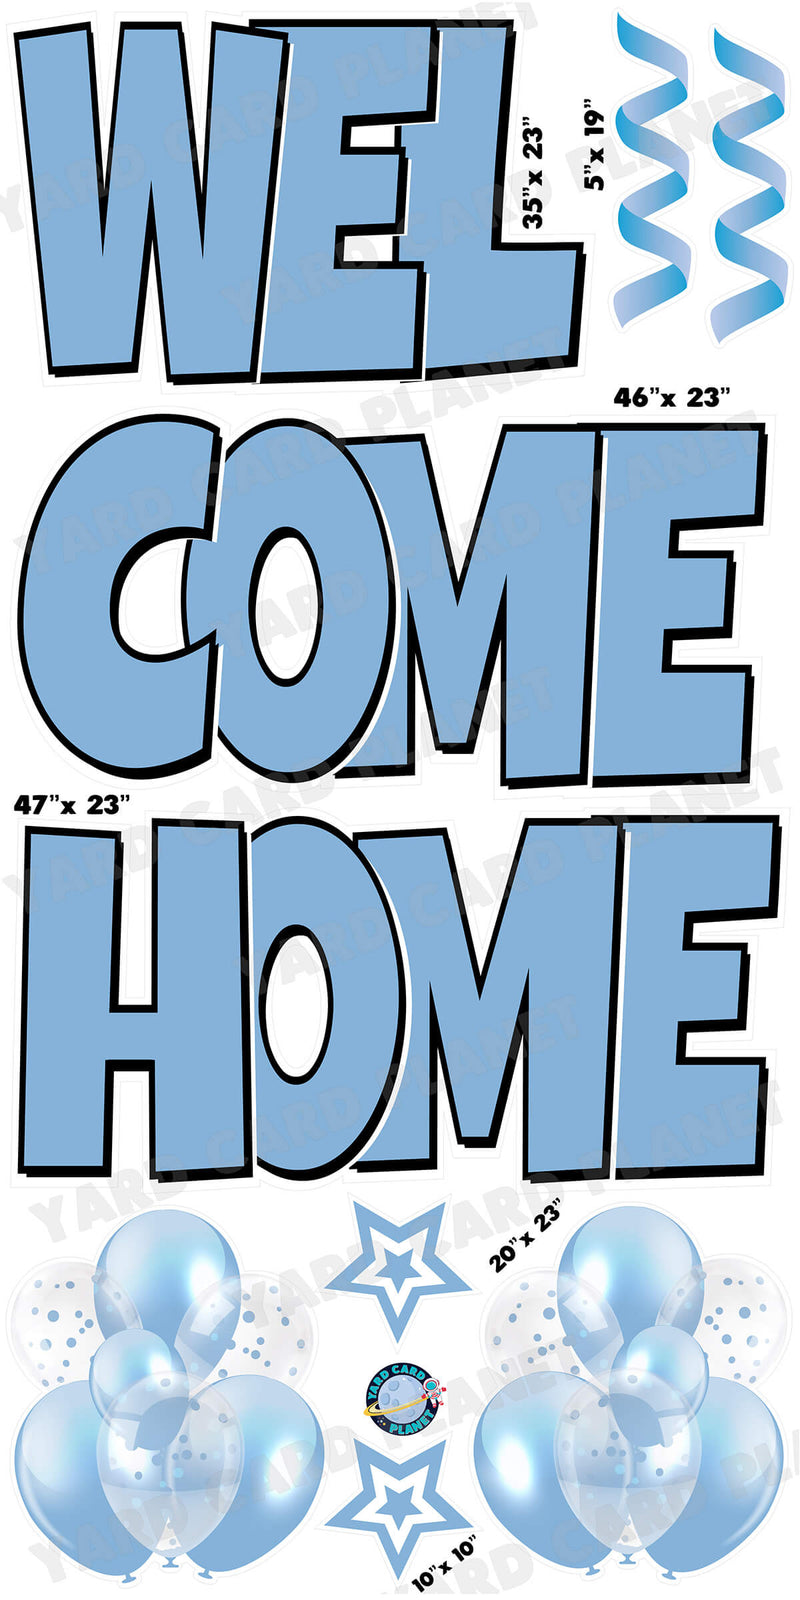 Large 23" Welcome Home Yard Card EZ Quick Sets in Luckiest Guy Font and Flair in Baby Blue Solid Color